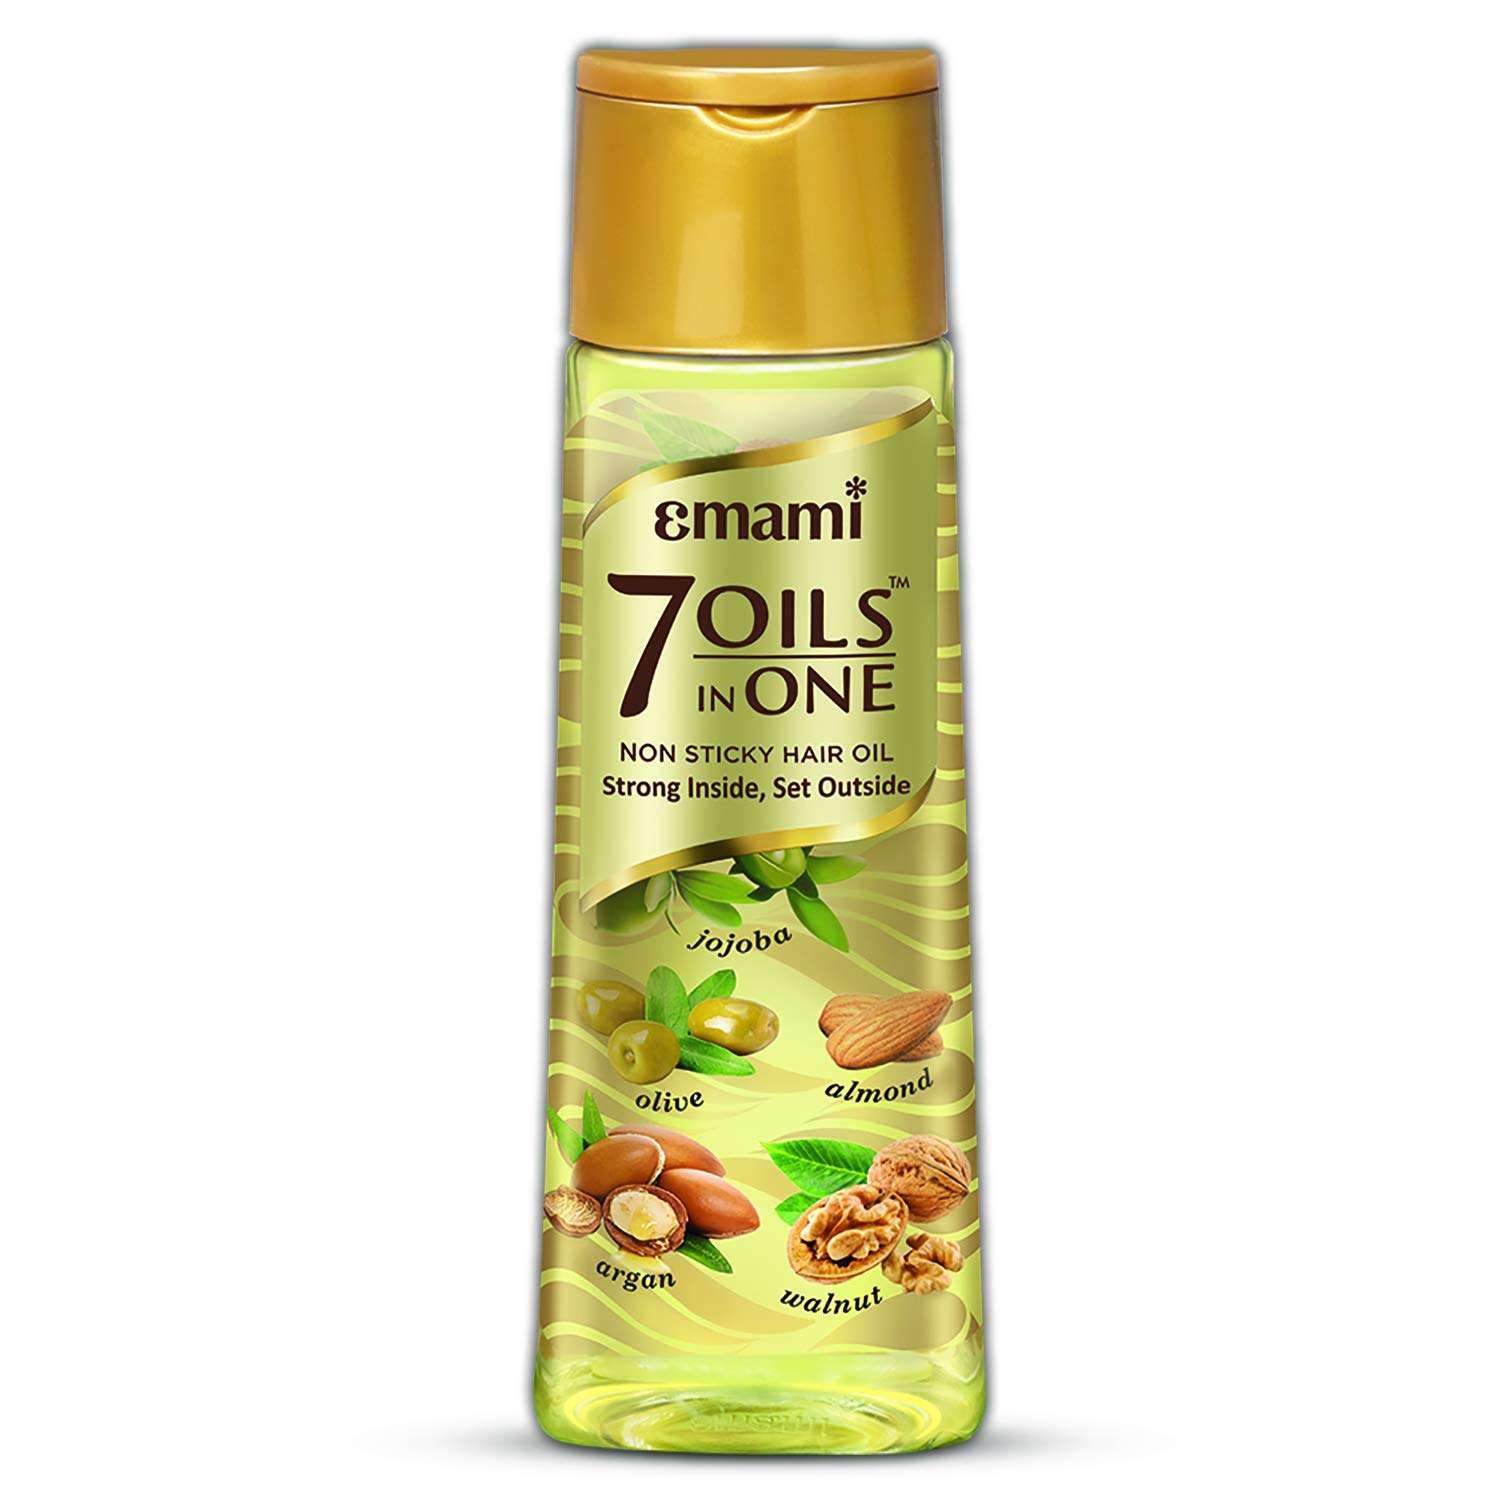 Buy Emami 7 Oils In One Non Sticky Hair Oil